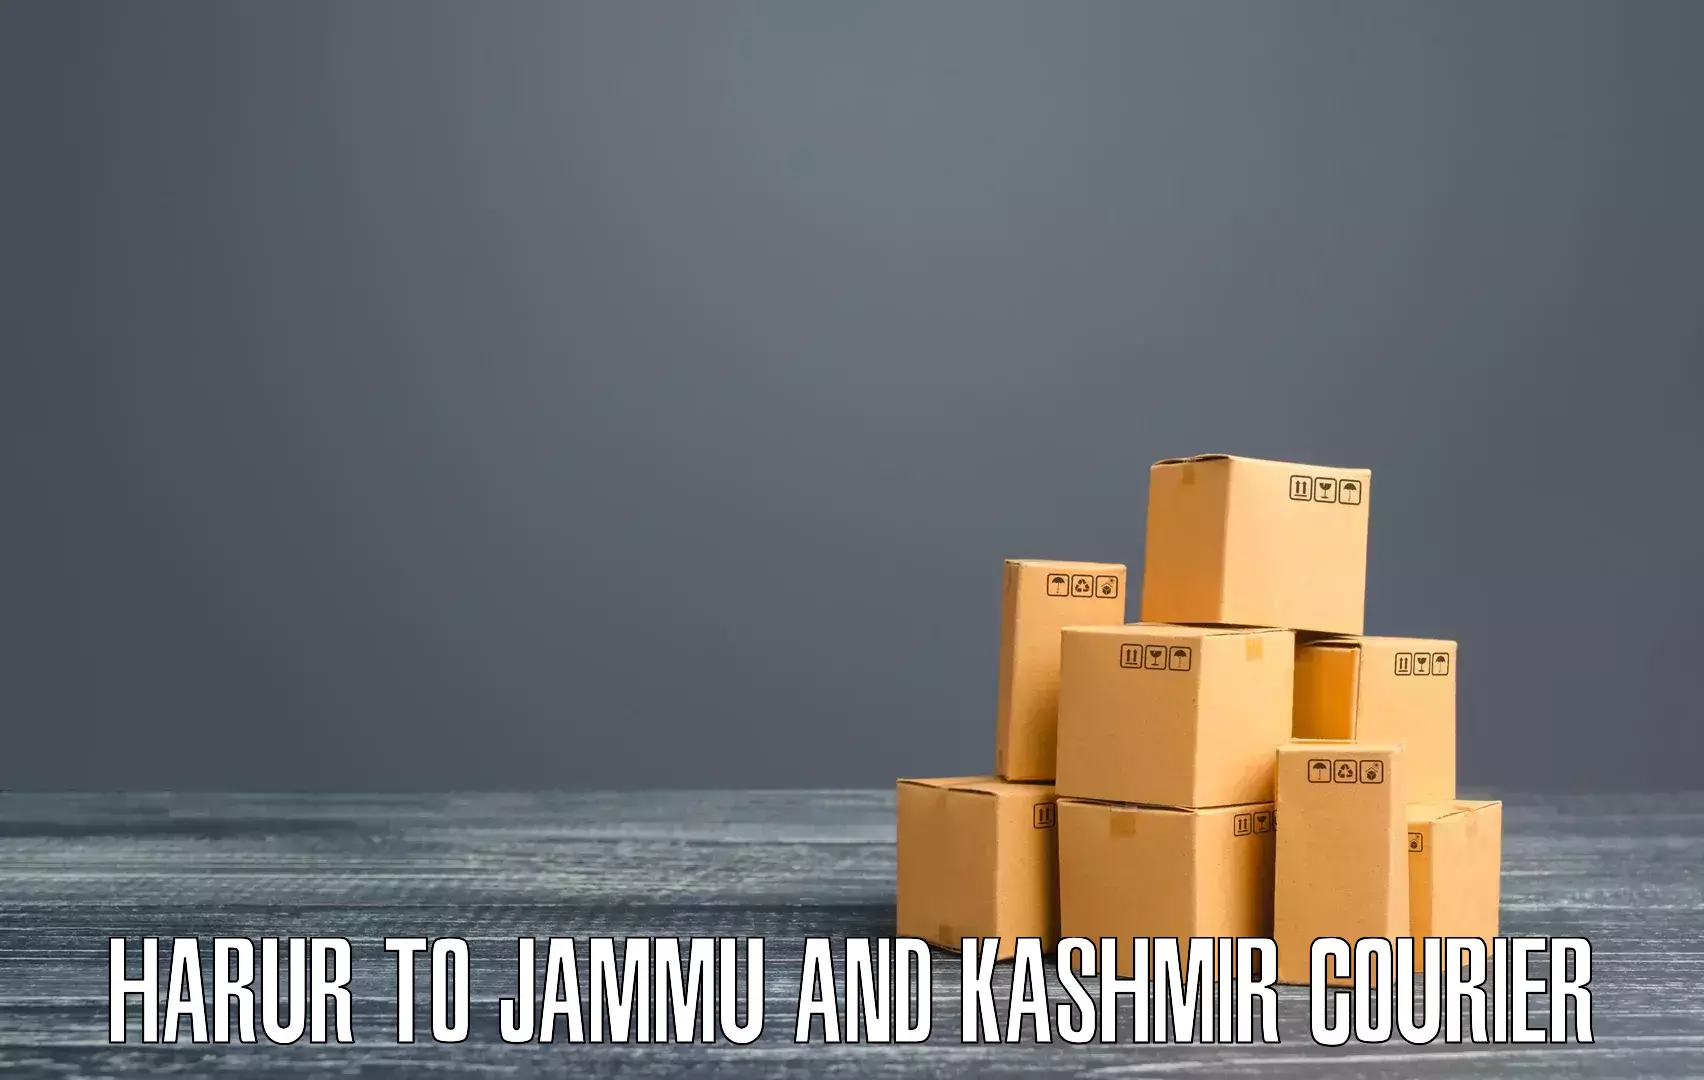 International courier networks Harur to Pulwama